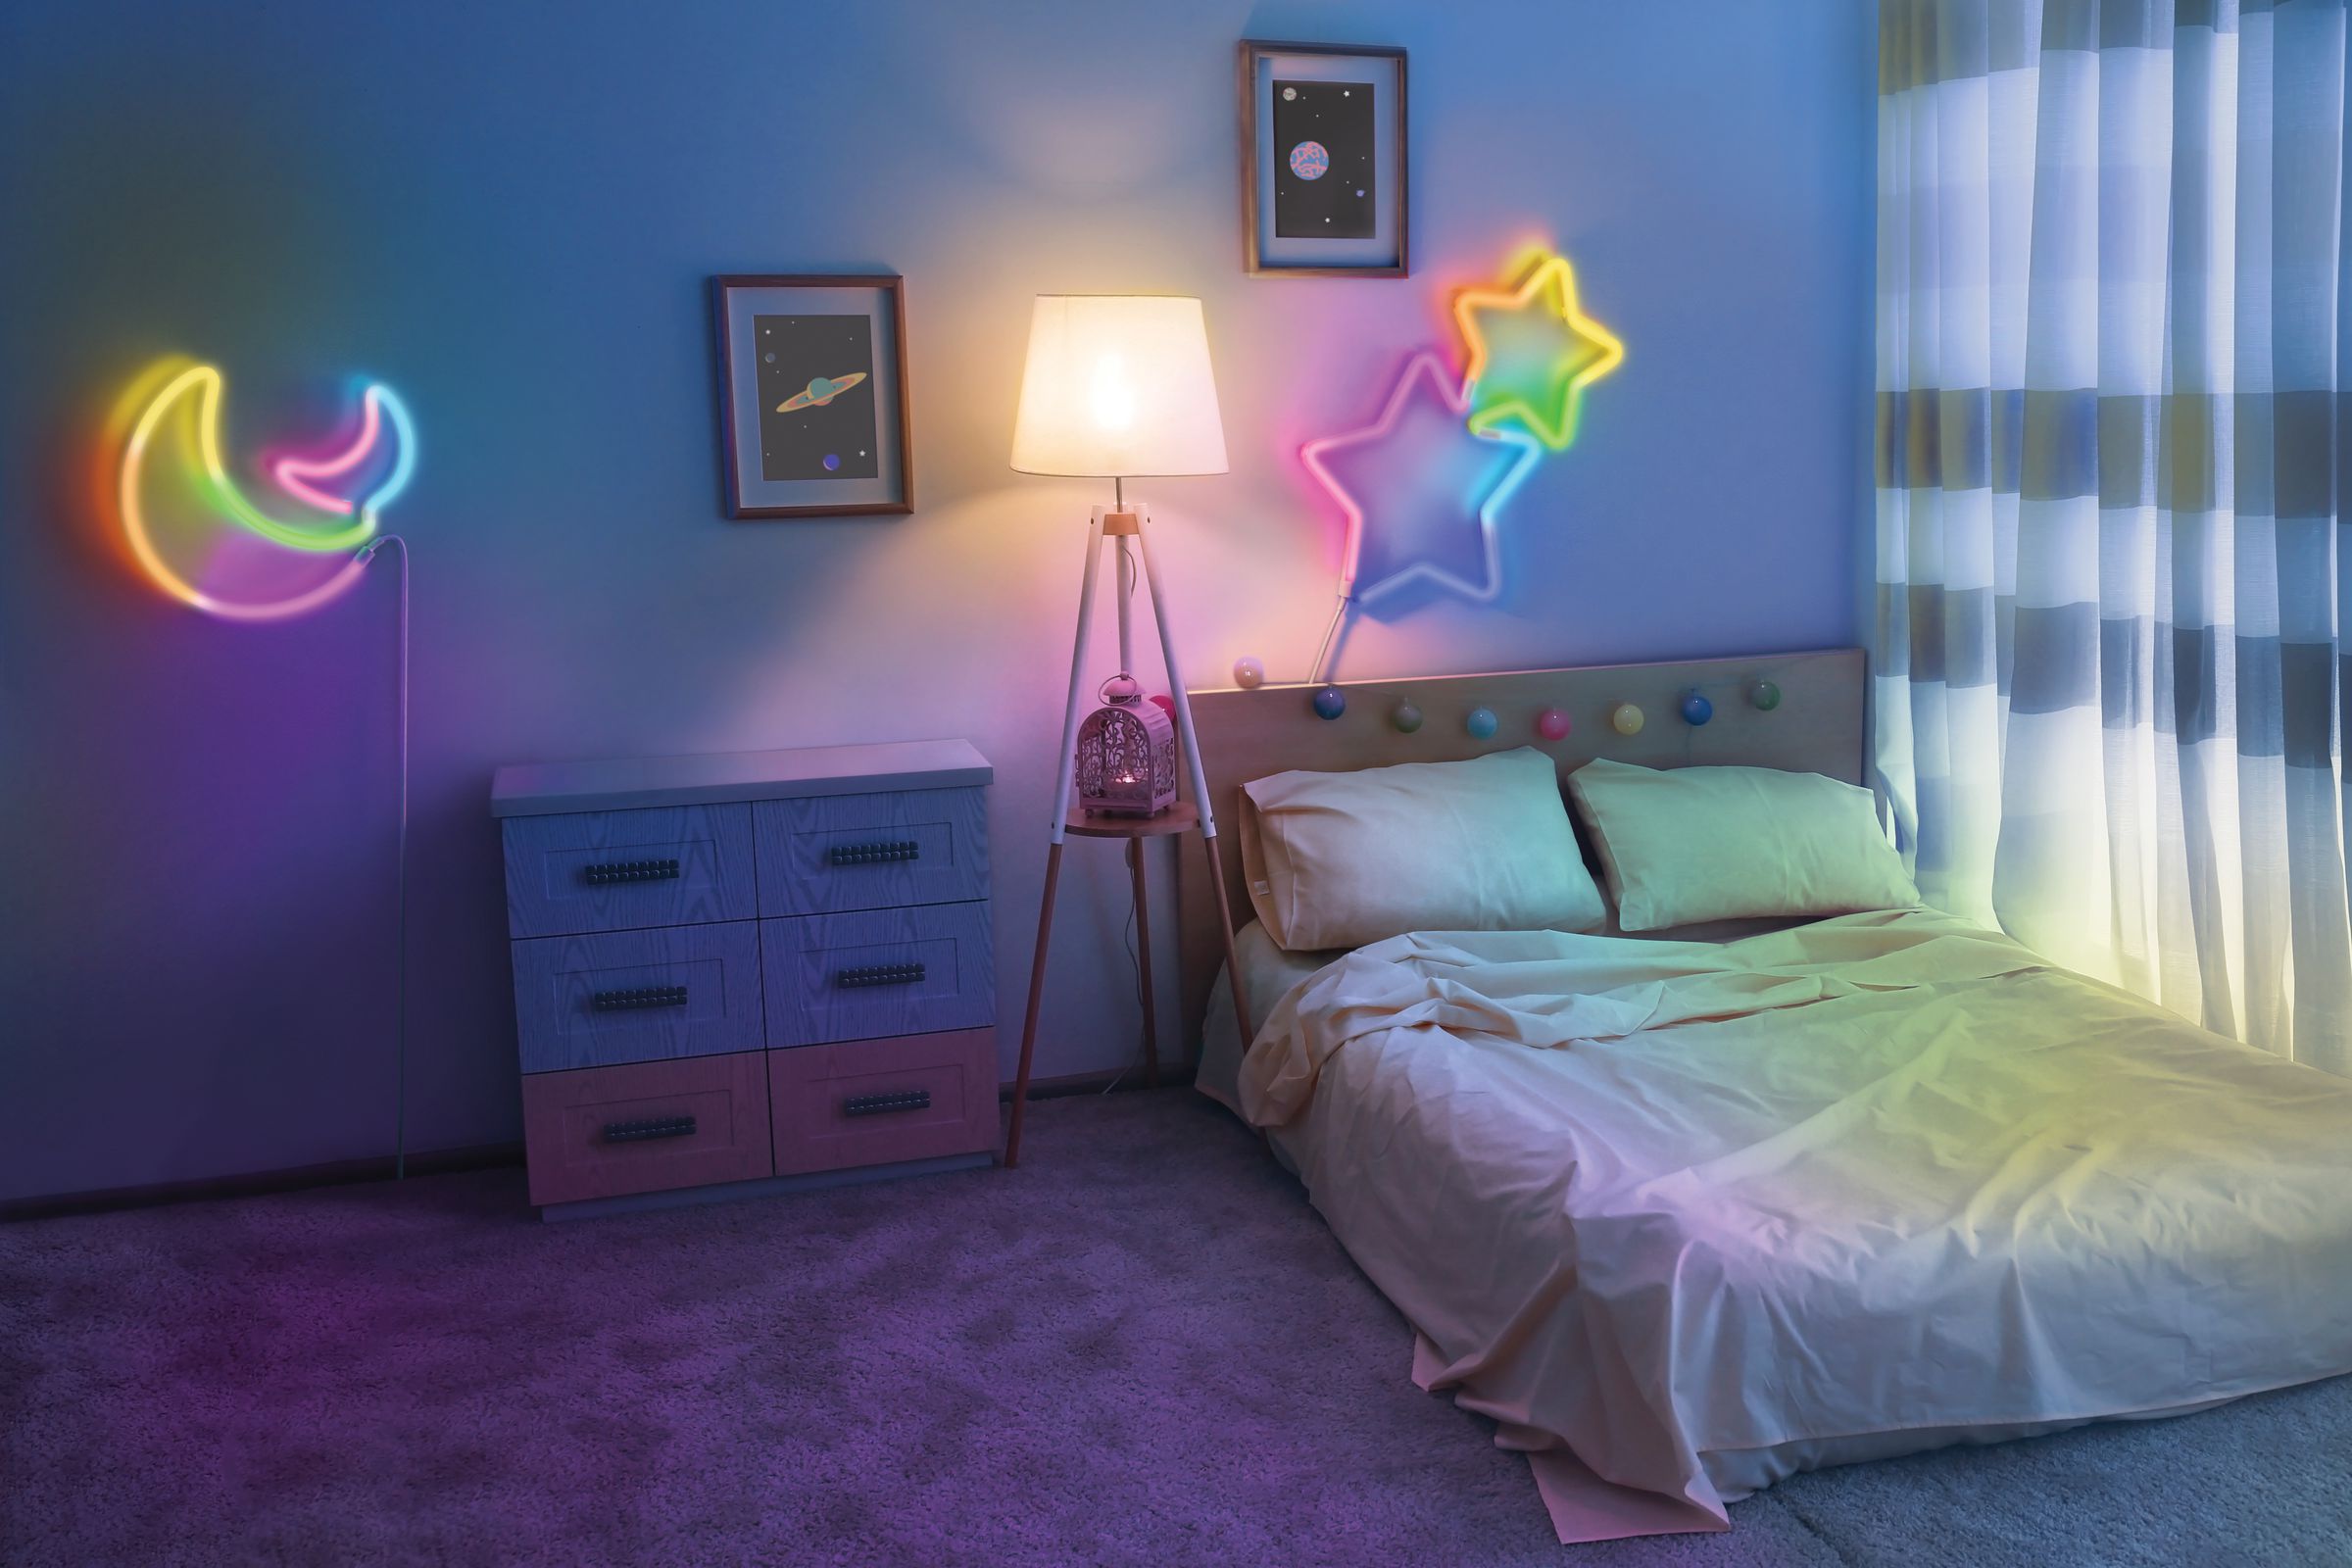 A bedroom with neon lights shaped like a moon and star on the wall.